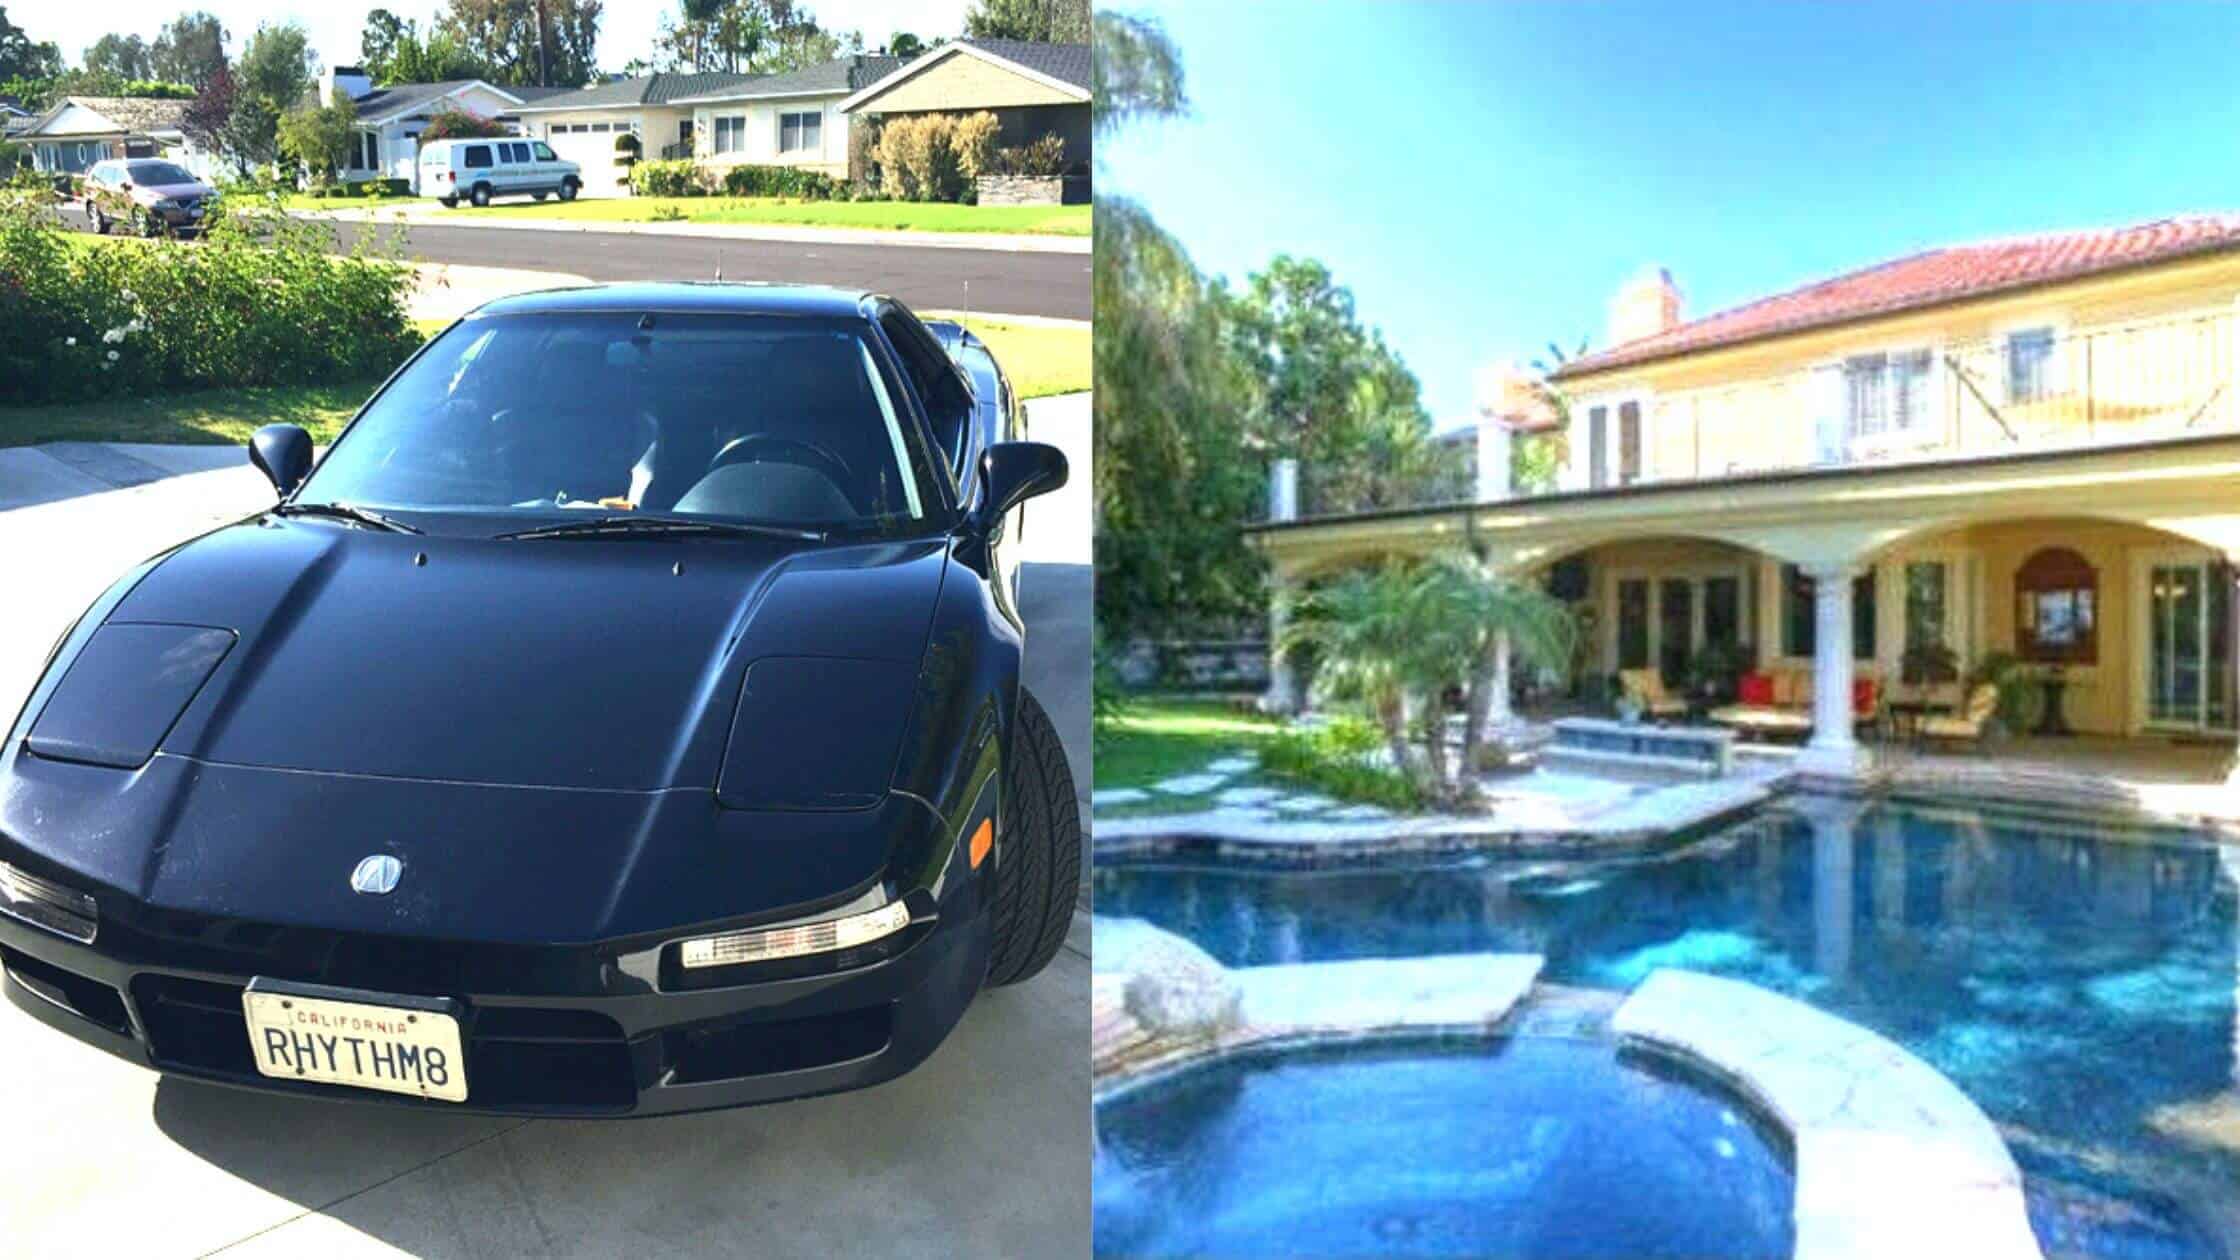 Marla Maples house and car